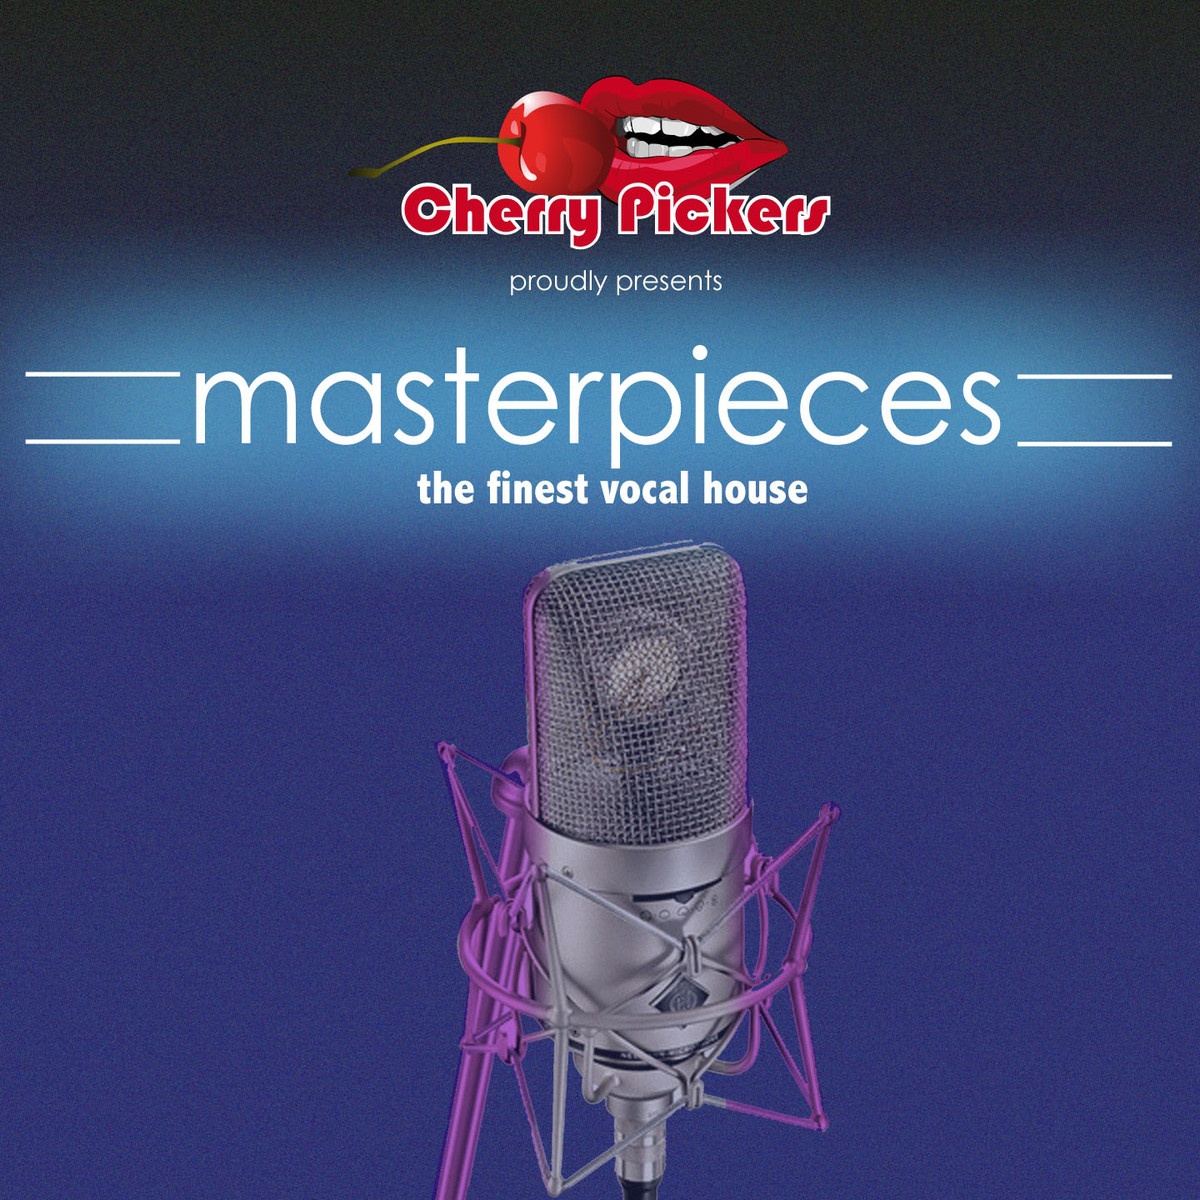 Masterpieces (The Finest Vocal House)